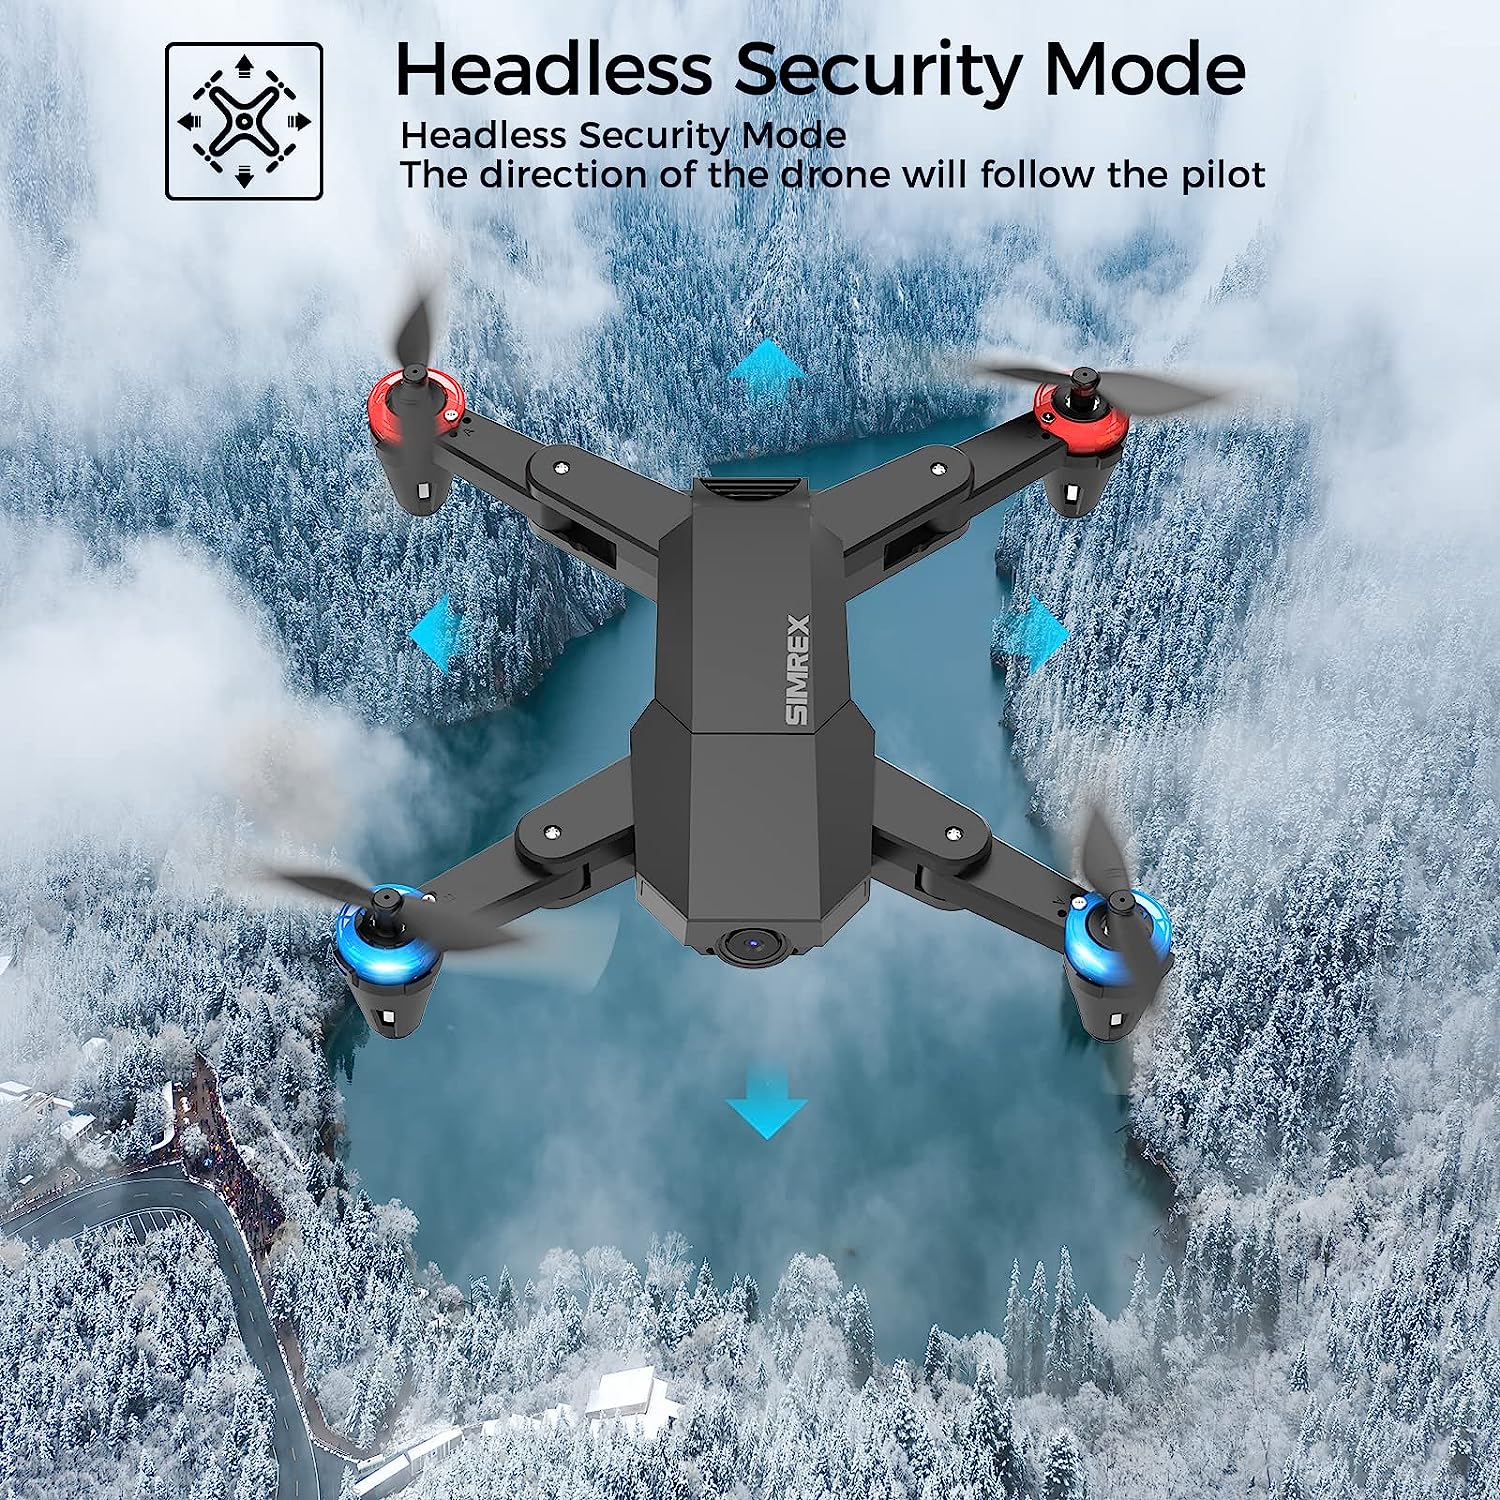 SIMREX X500 mini Drone Optical Flow Positioning RC Quadcopter with 720P HD Camera, Altitude Hold Headless Mode, Foldable FPV Drones WiFi Live Video 3D Flips Easy Fly Steady for Learning Dark Gray